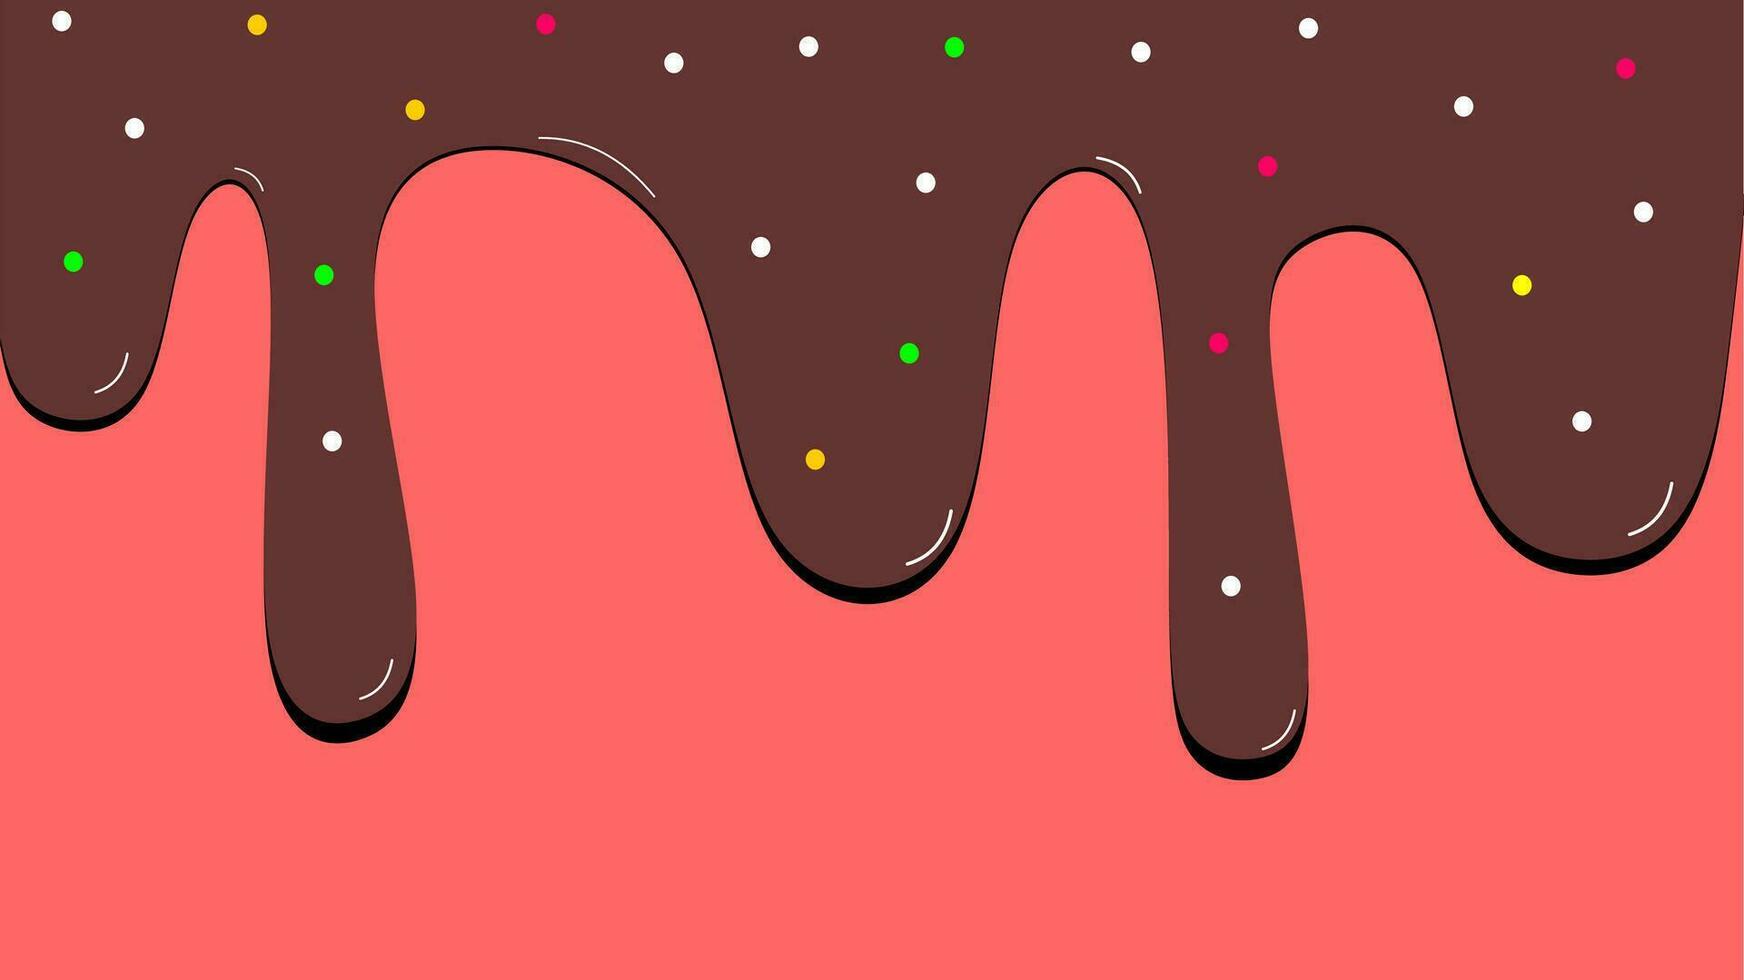 Melting chocolate and strawberry ice cream background with sprinkles . Melting chocolate background with copy space area vector